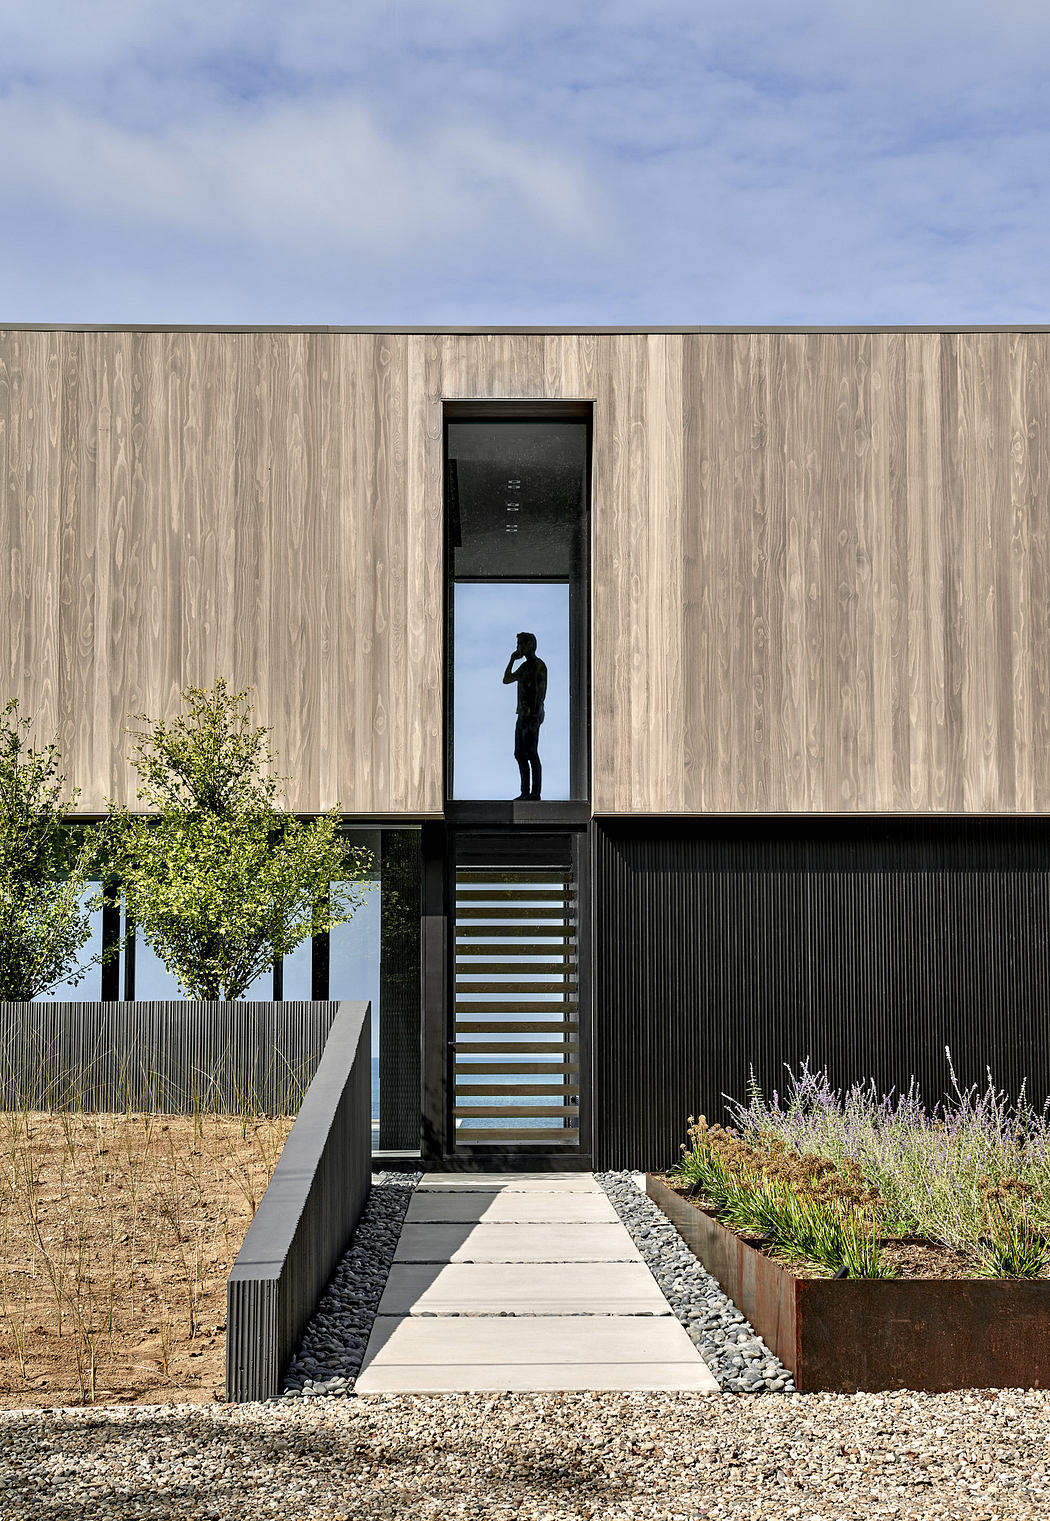 Modern house facade with wooden panels and a person at the entrance.